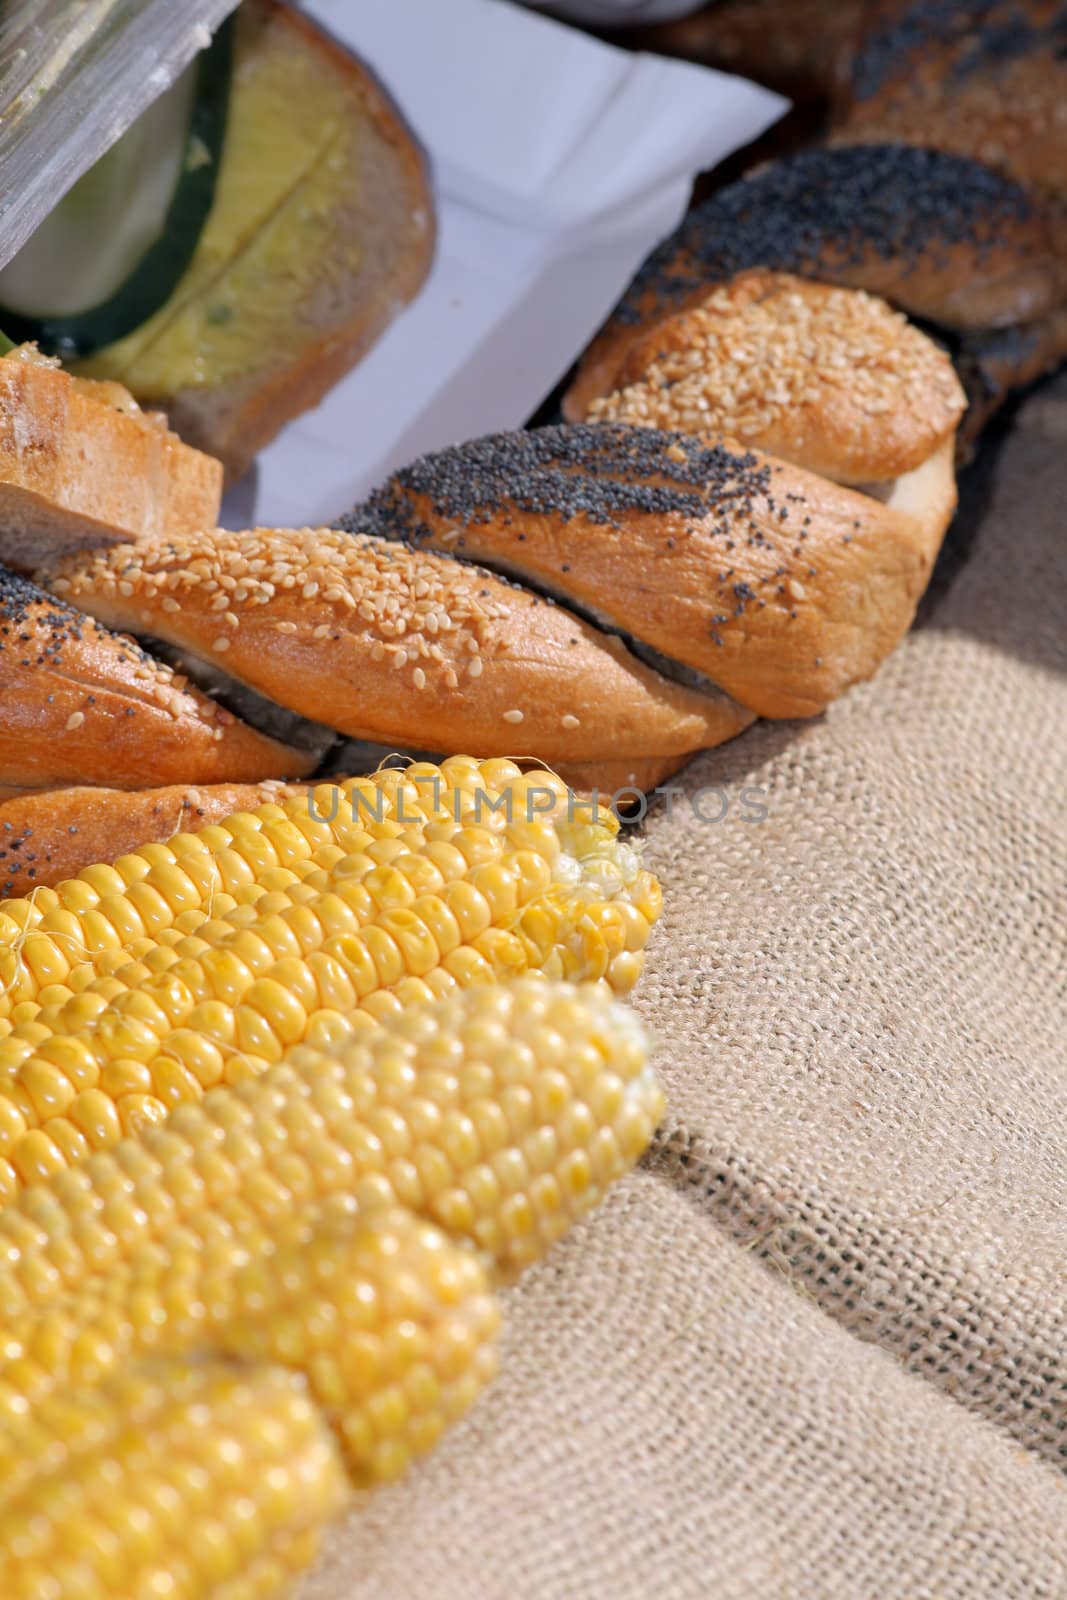 Corn and bread at the street market
